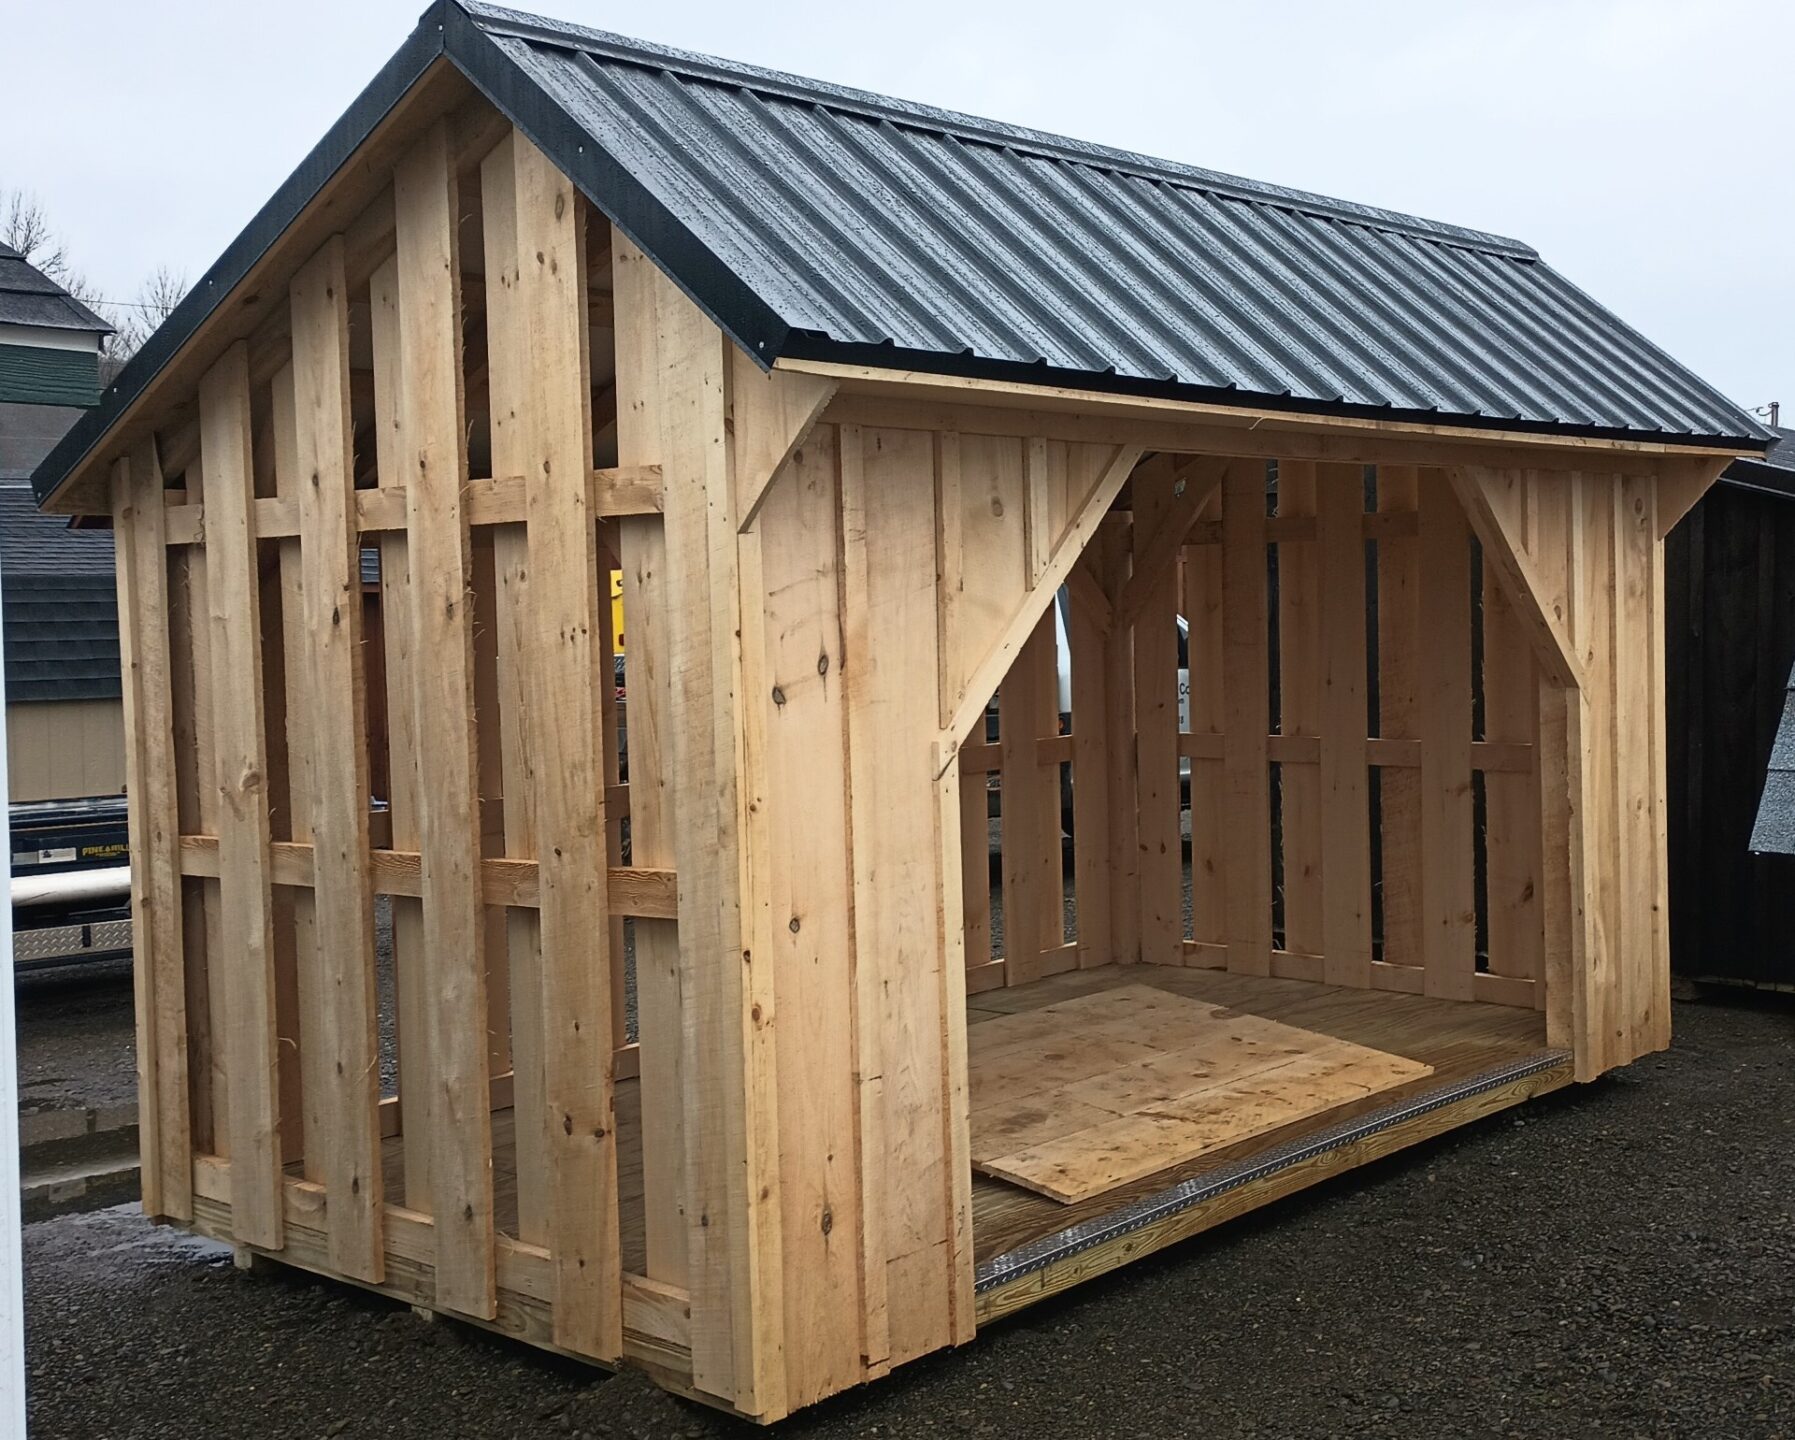 3 Sided wood shed with metal roof and ramp for opening